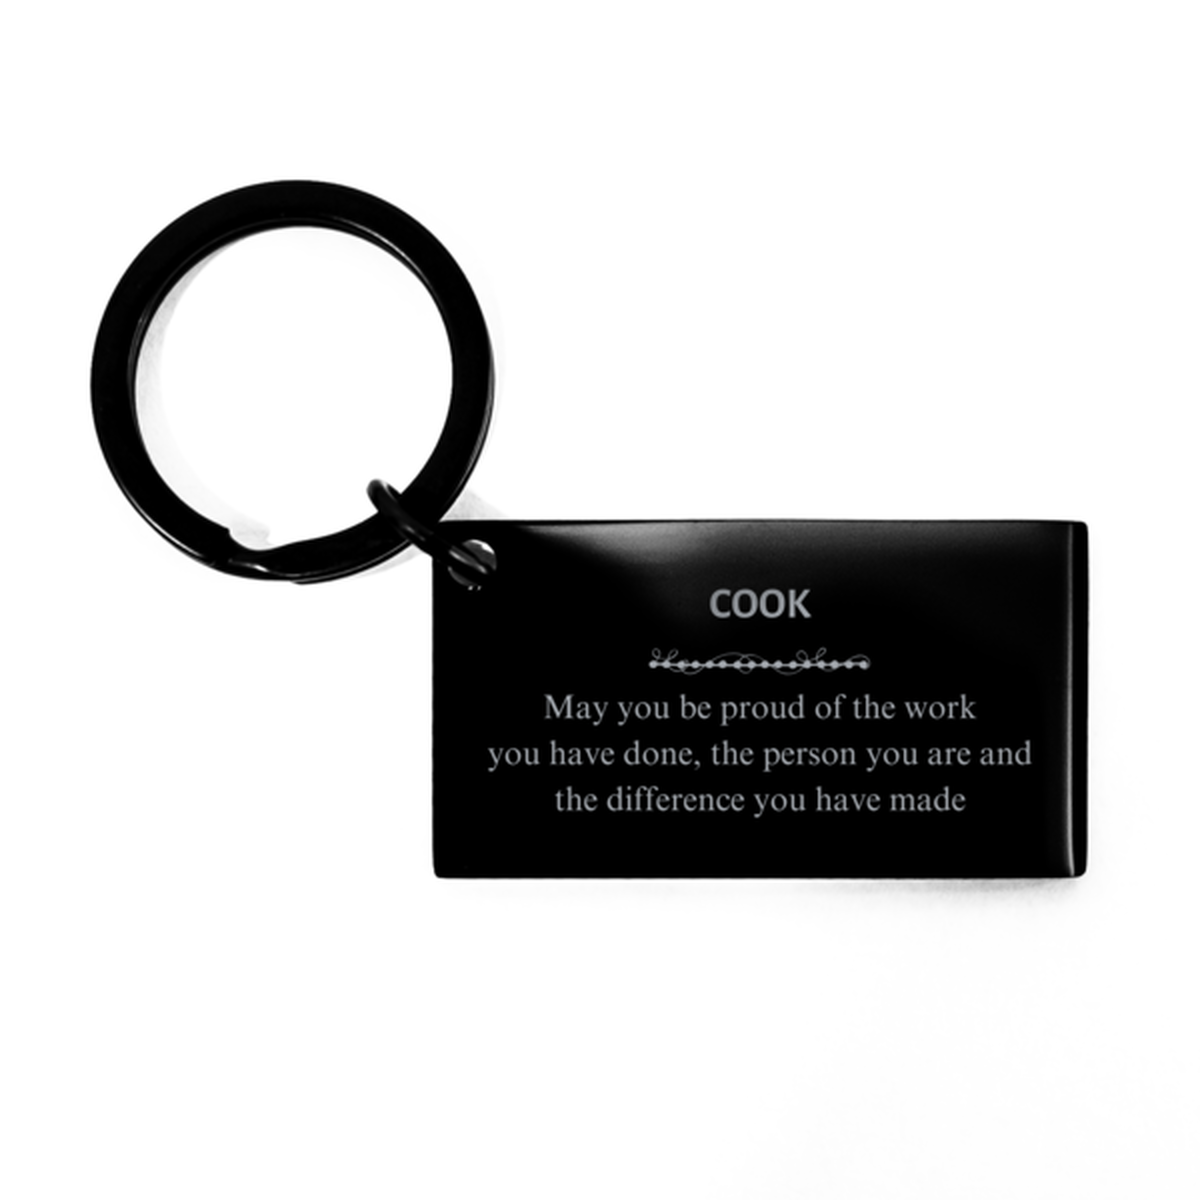 Executive Assistant May you be proud of the work you have done, Retirement Cook Keychain for Colleague Appreciation Gifts Amazing for Cook